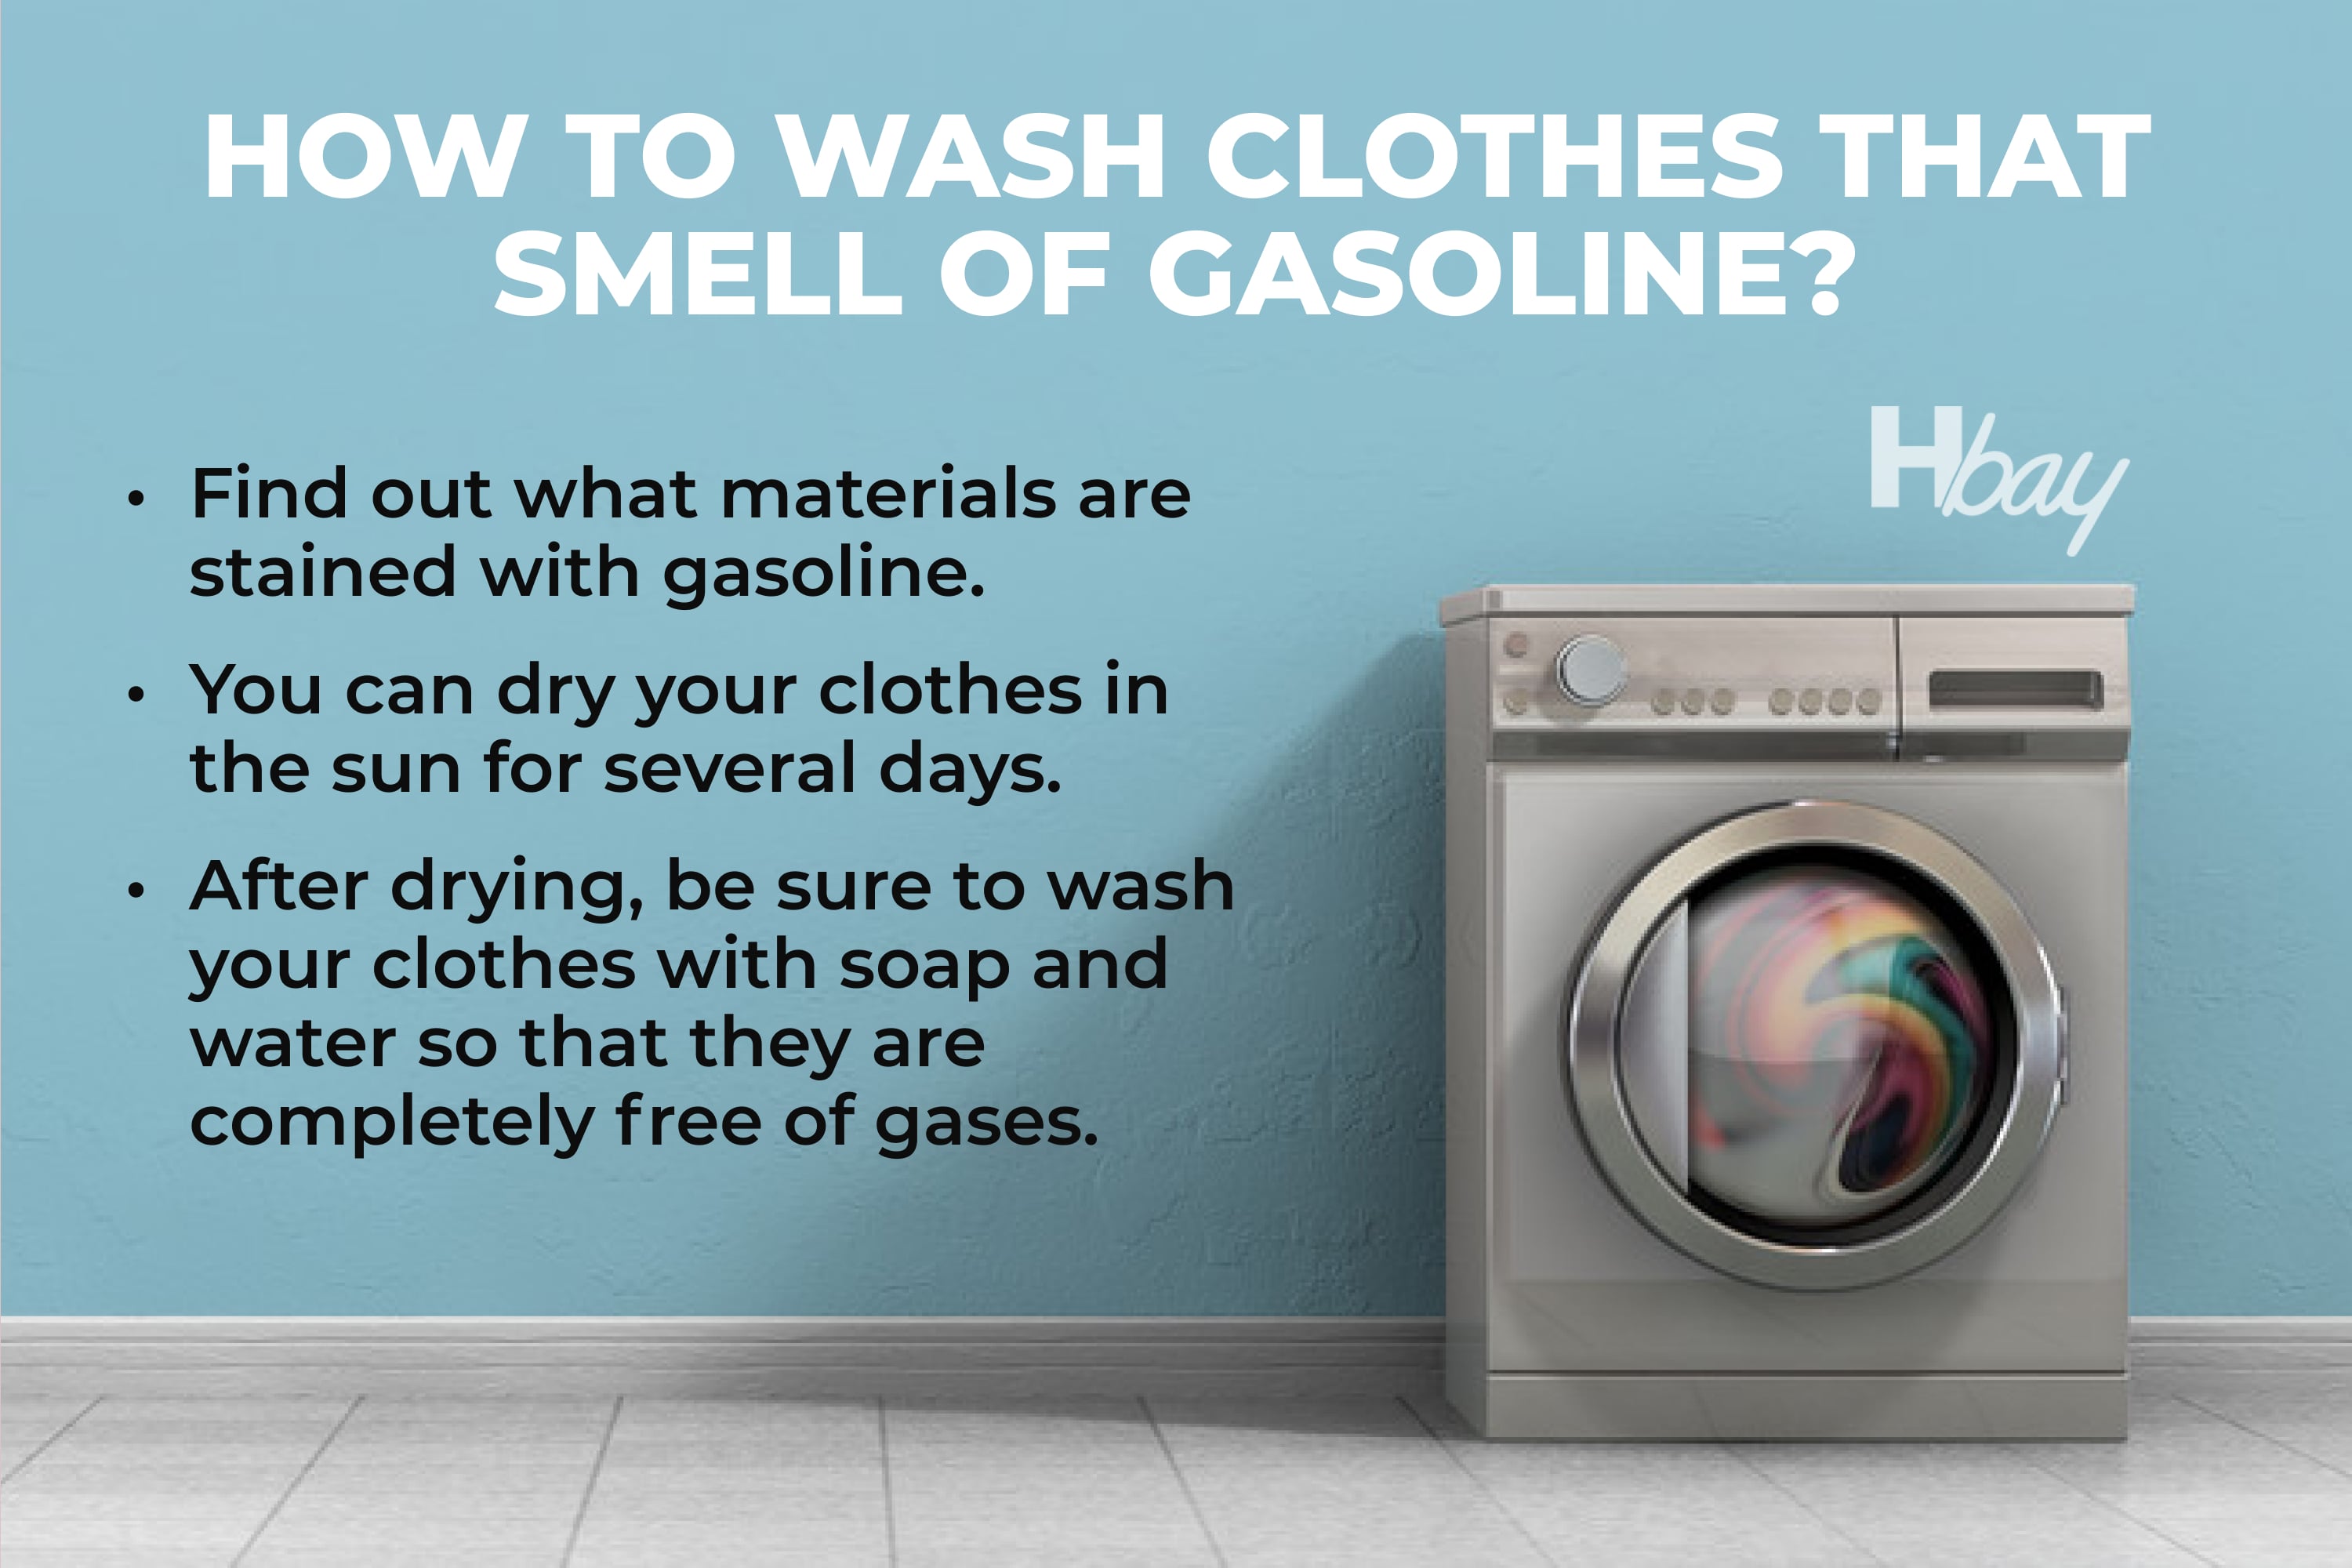 How to wash clothes that smell of gasoline